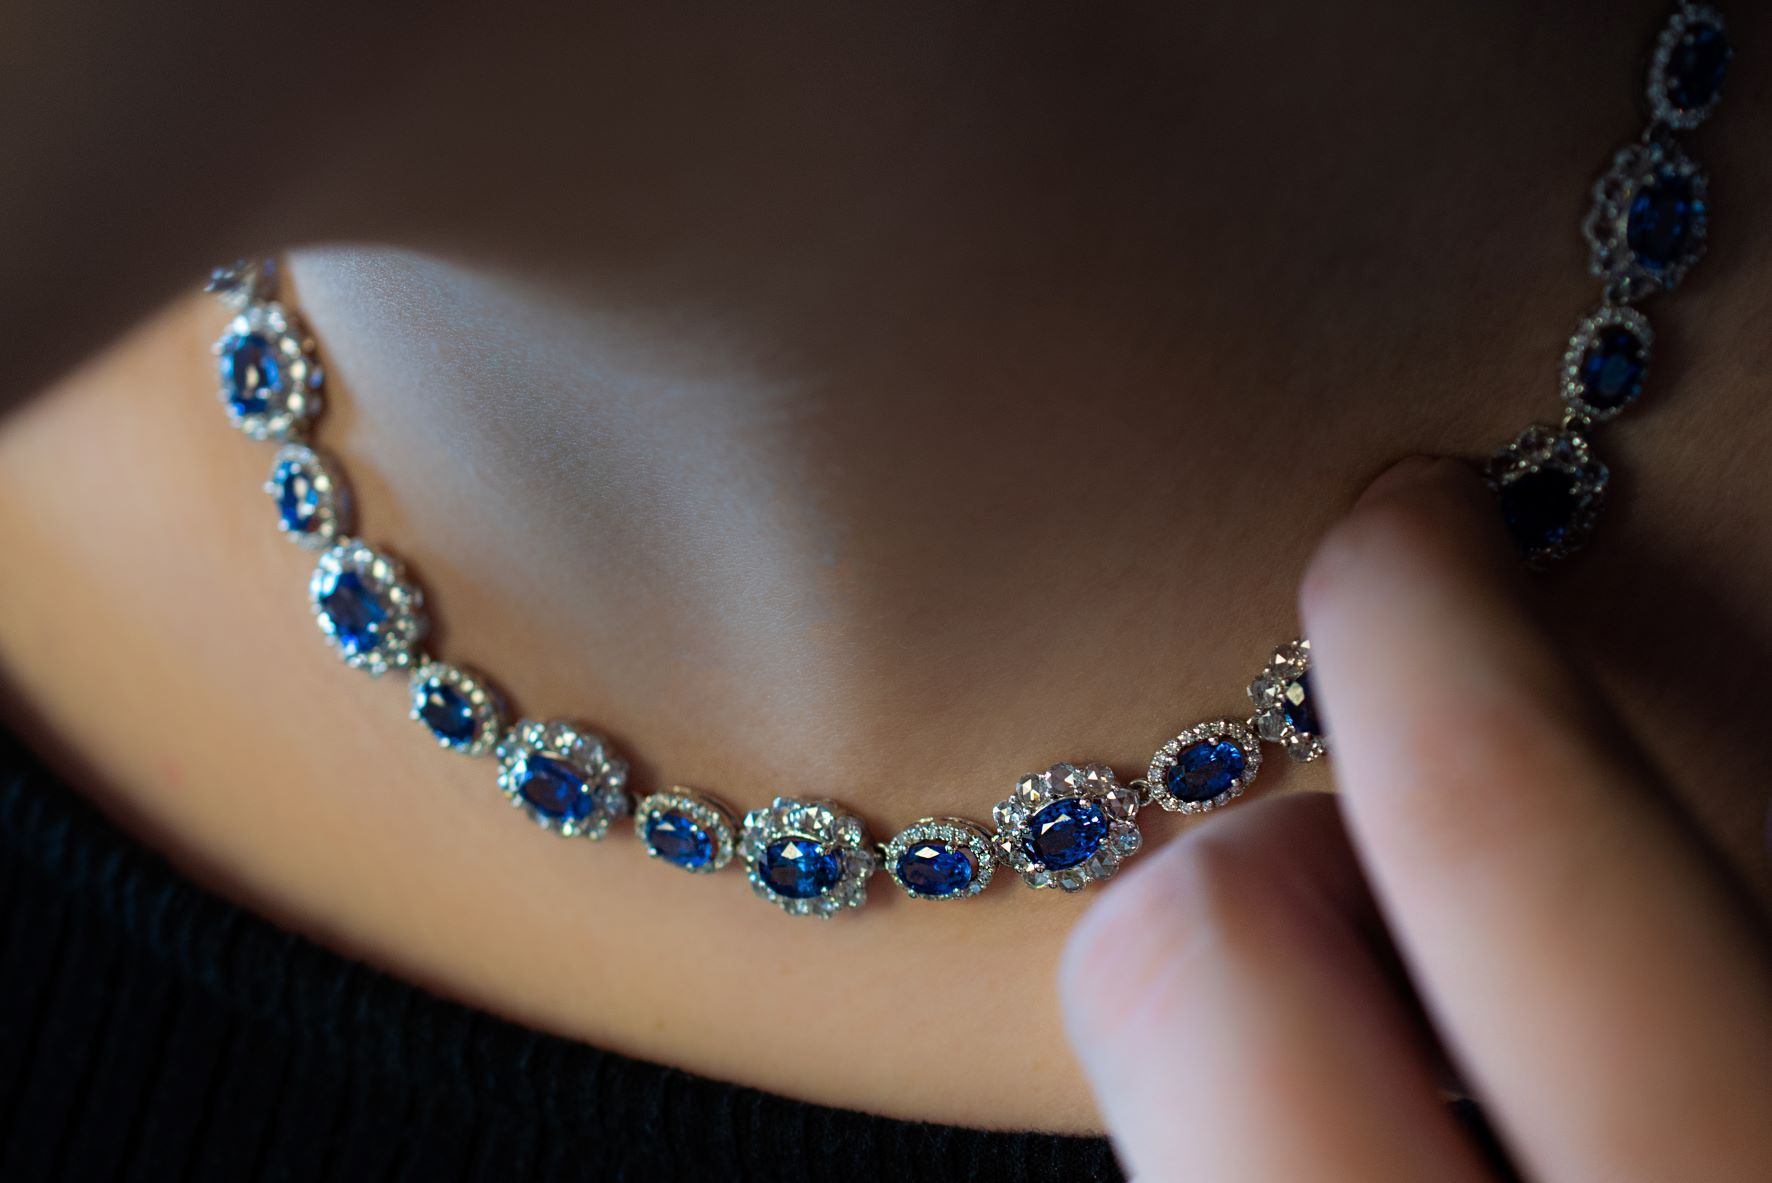 15.76 ct Sapphire and Diamond Necklace 18k